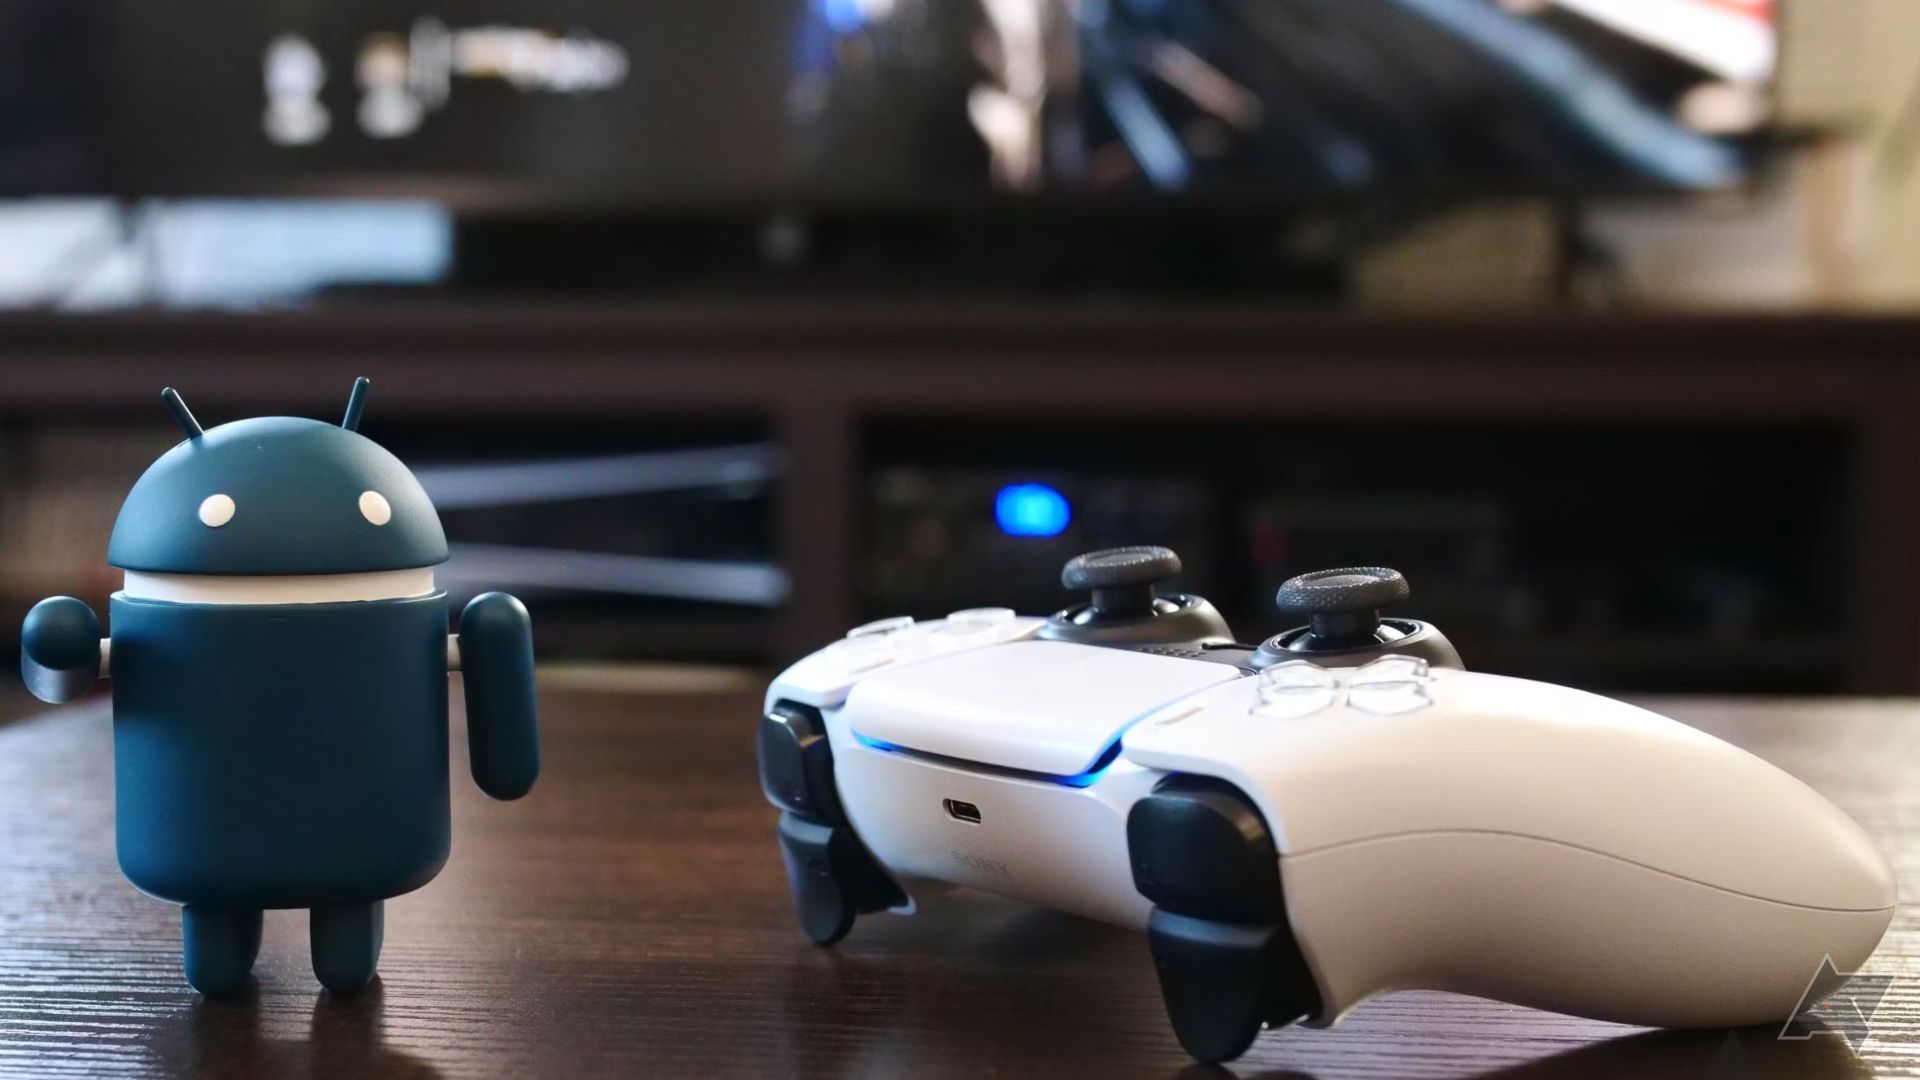 The Android robot stands next to a PS5 game controller